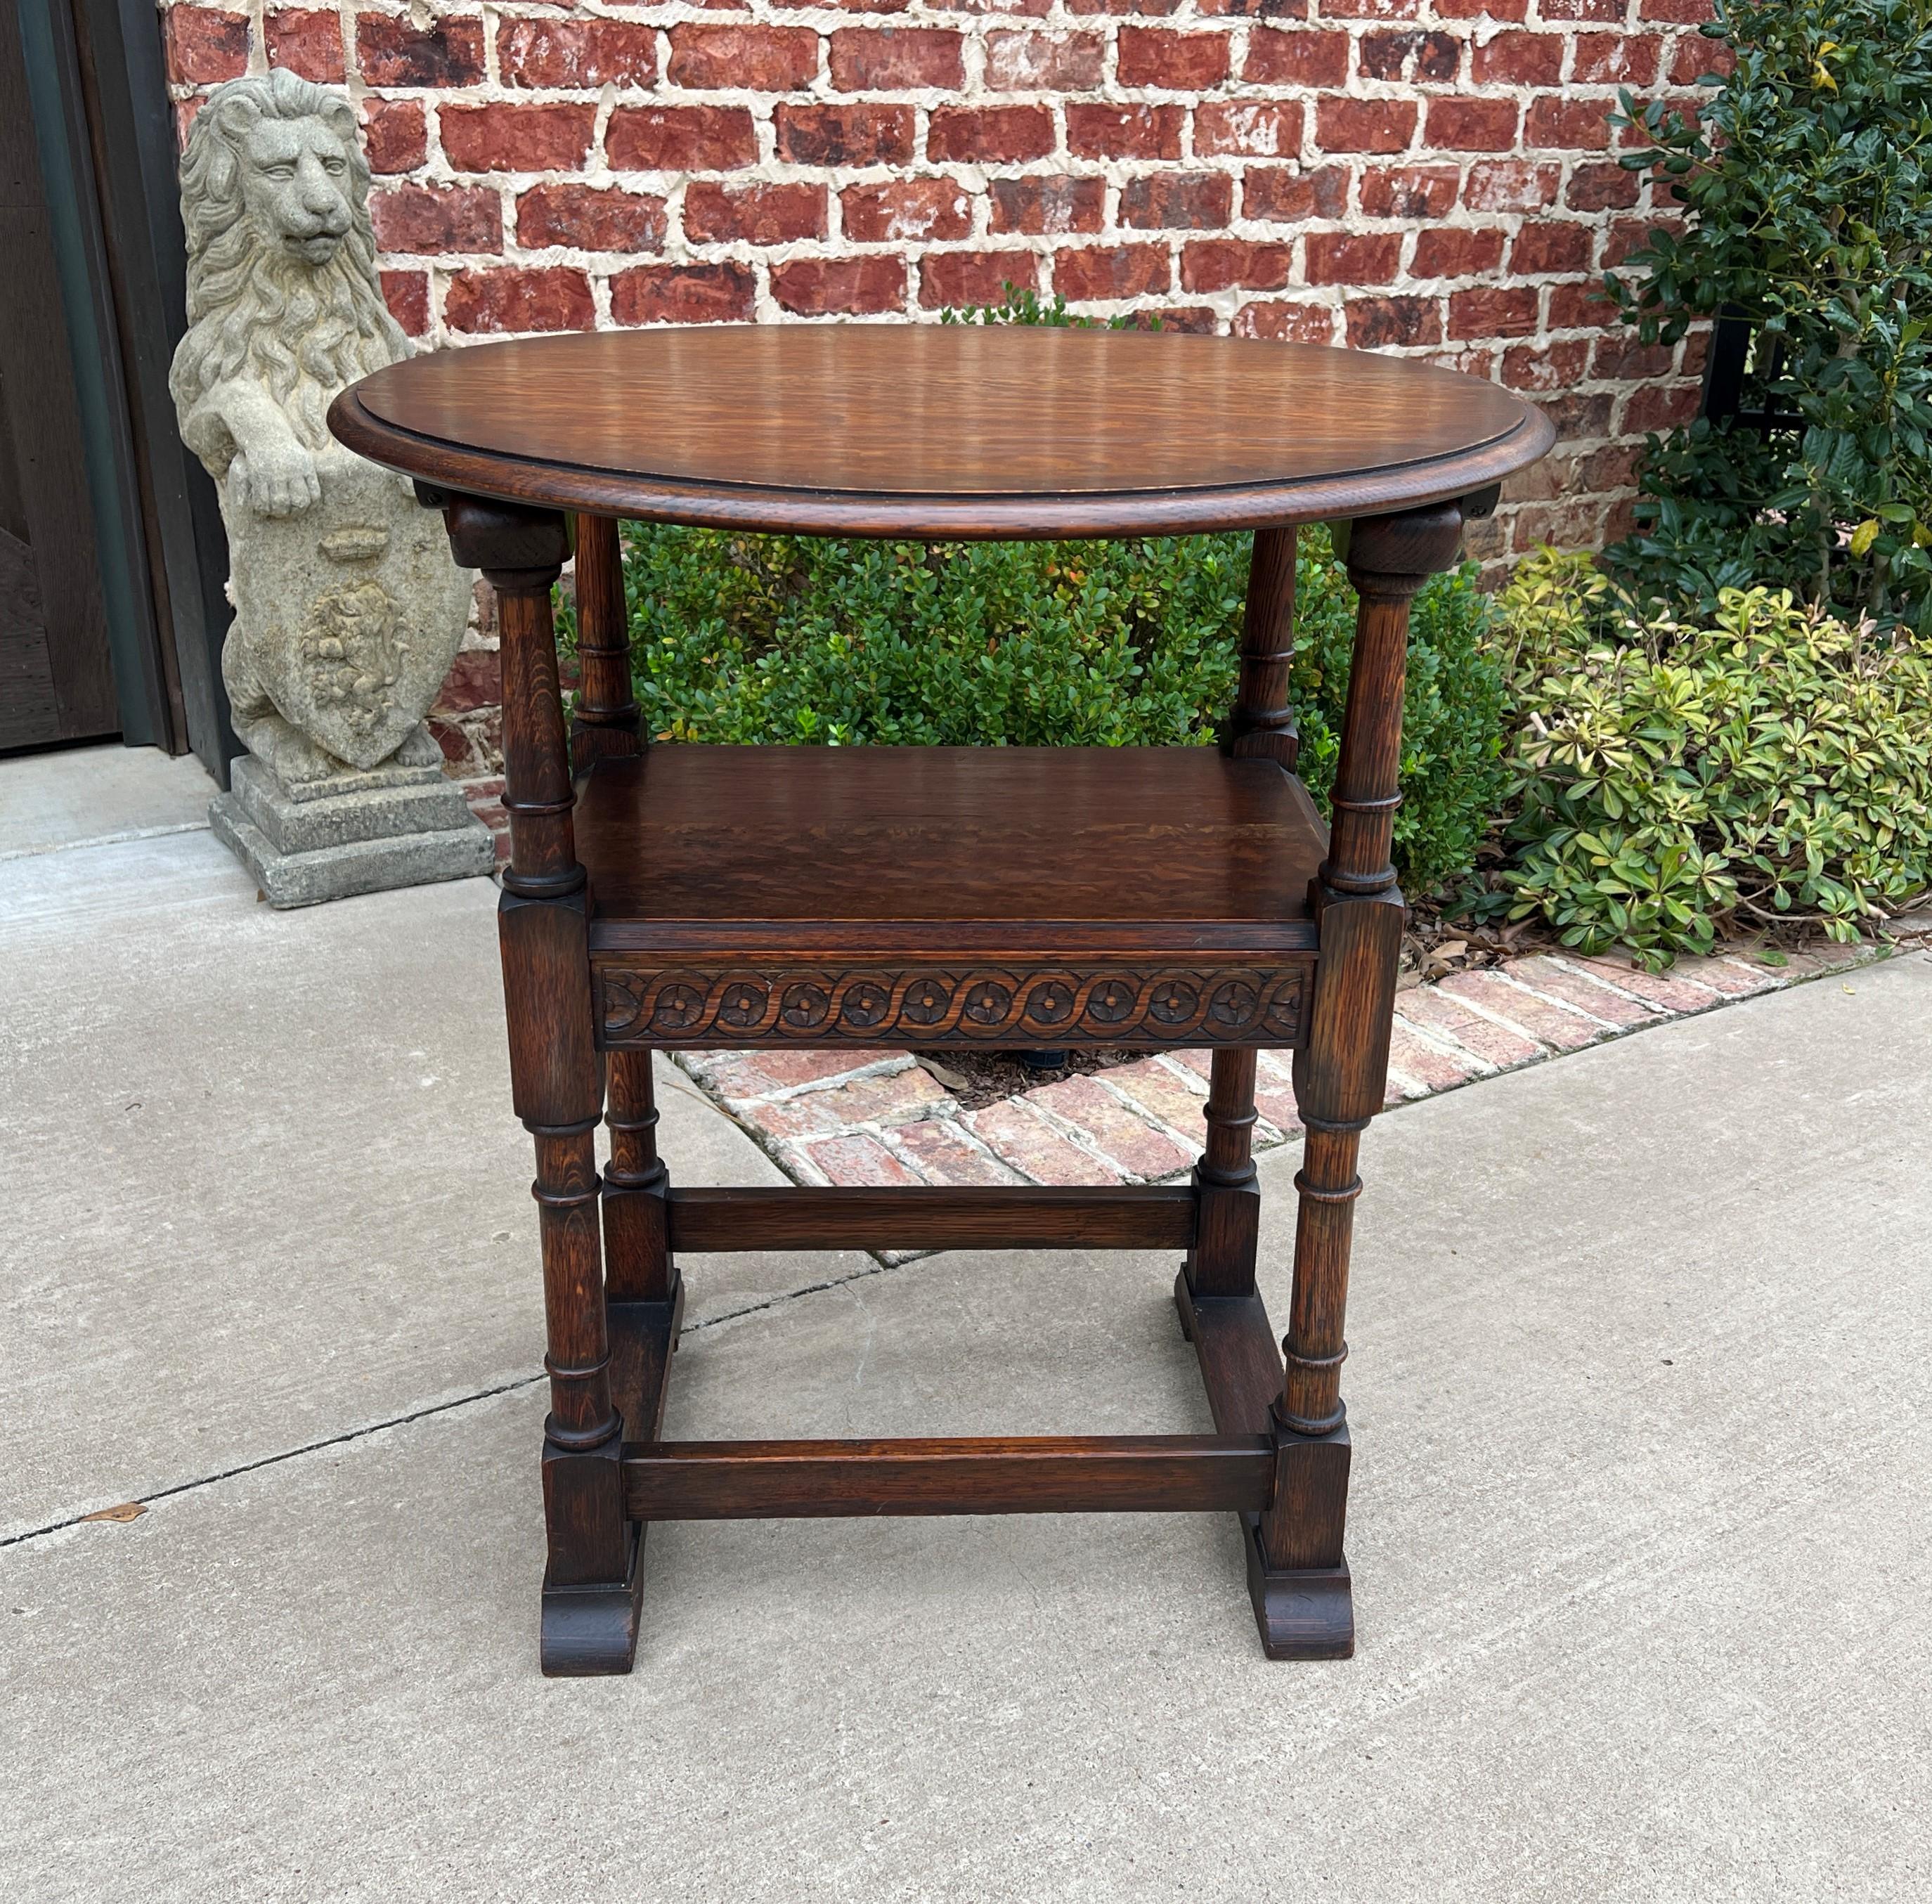 Antique English Monk's Chair Bench Oak Converts to Folding Table Round 19th C In Good Condition For Sale In Tyler, TX